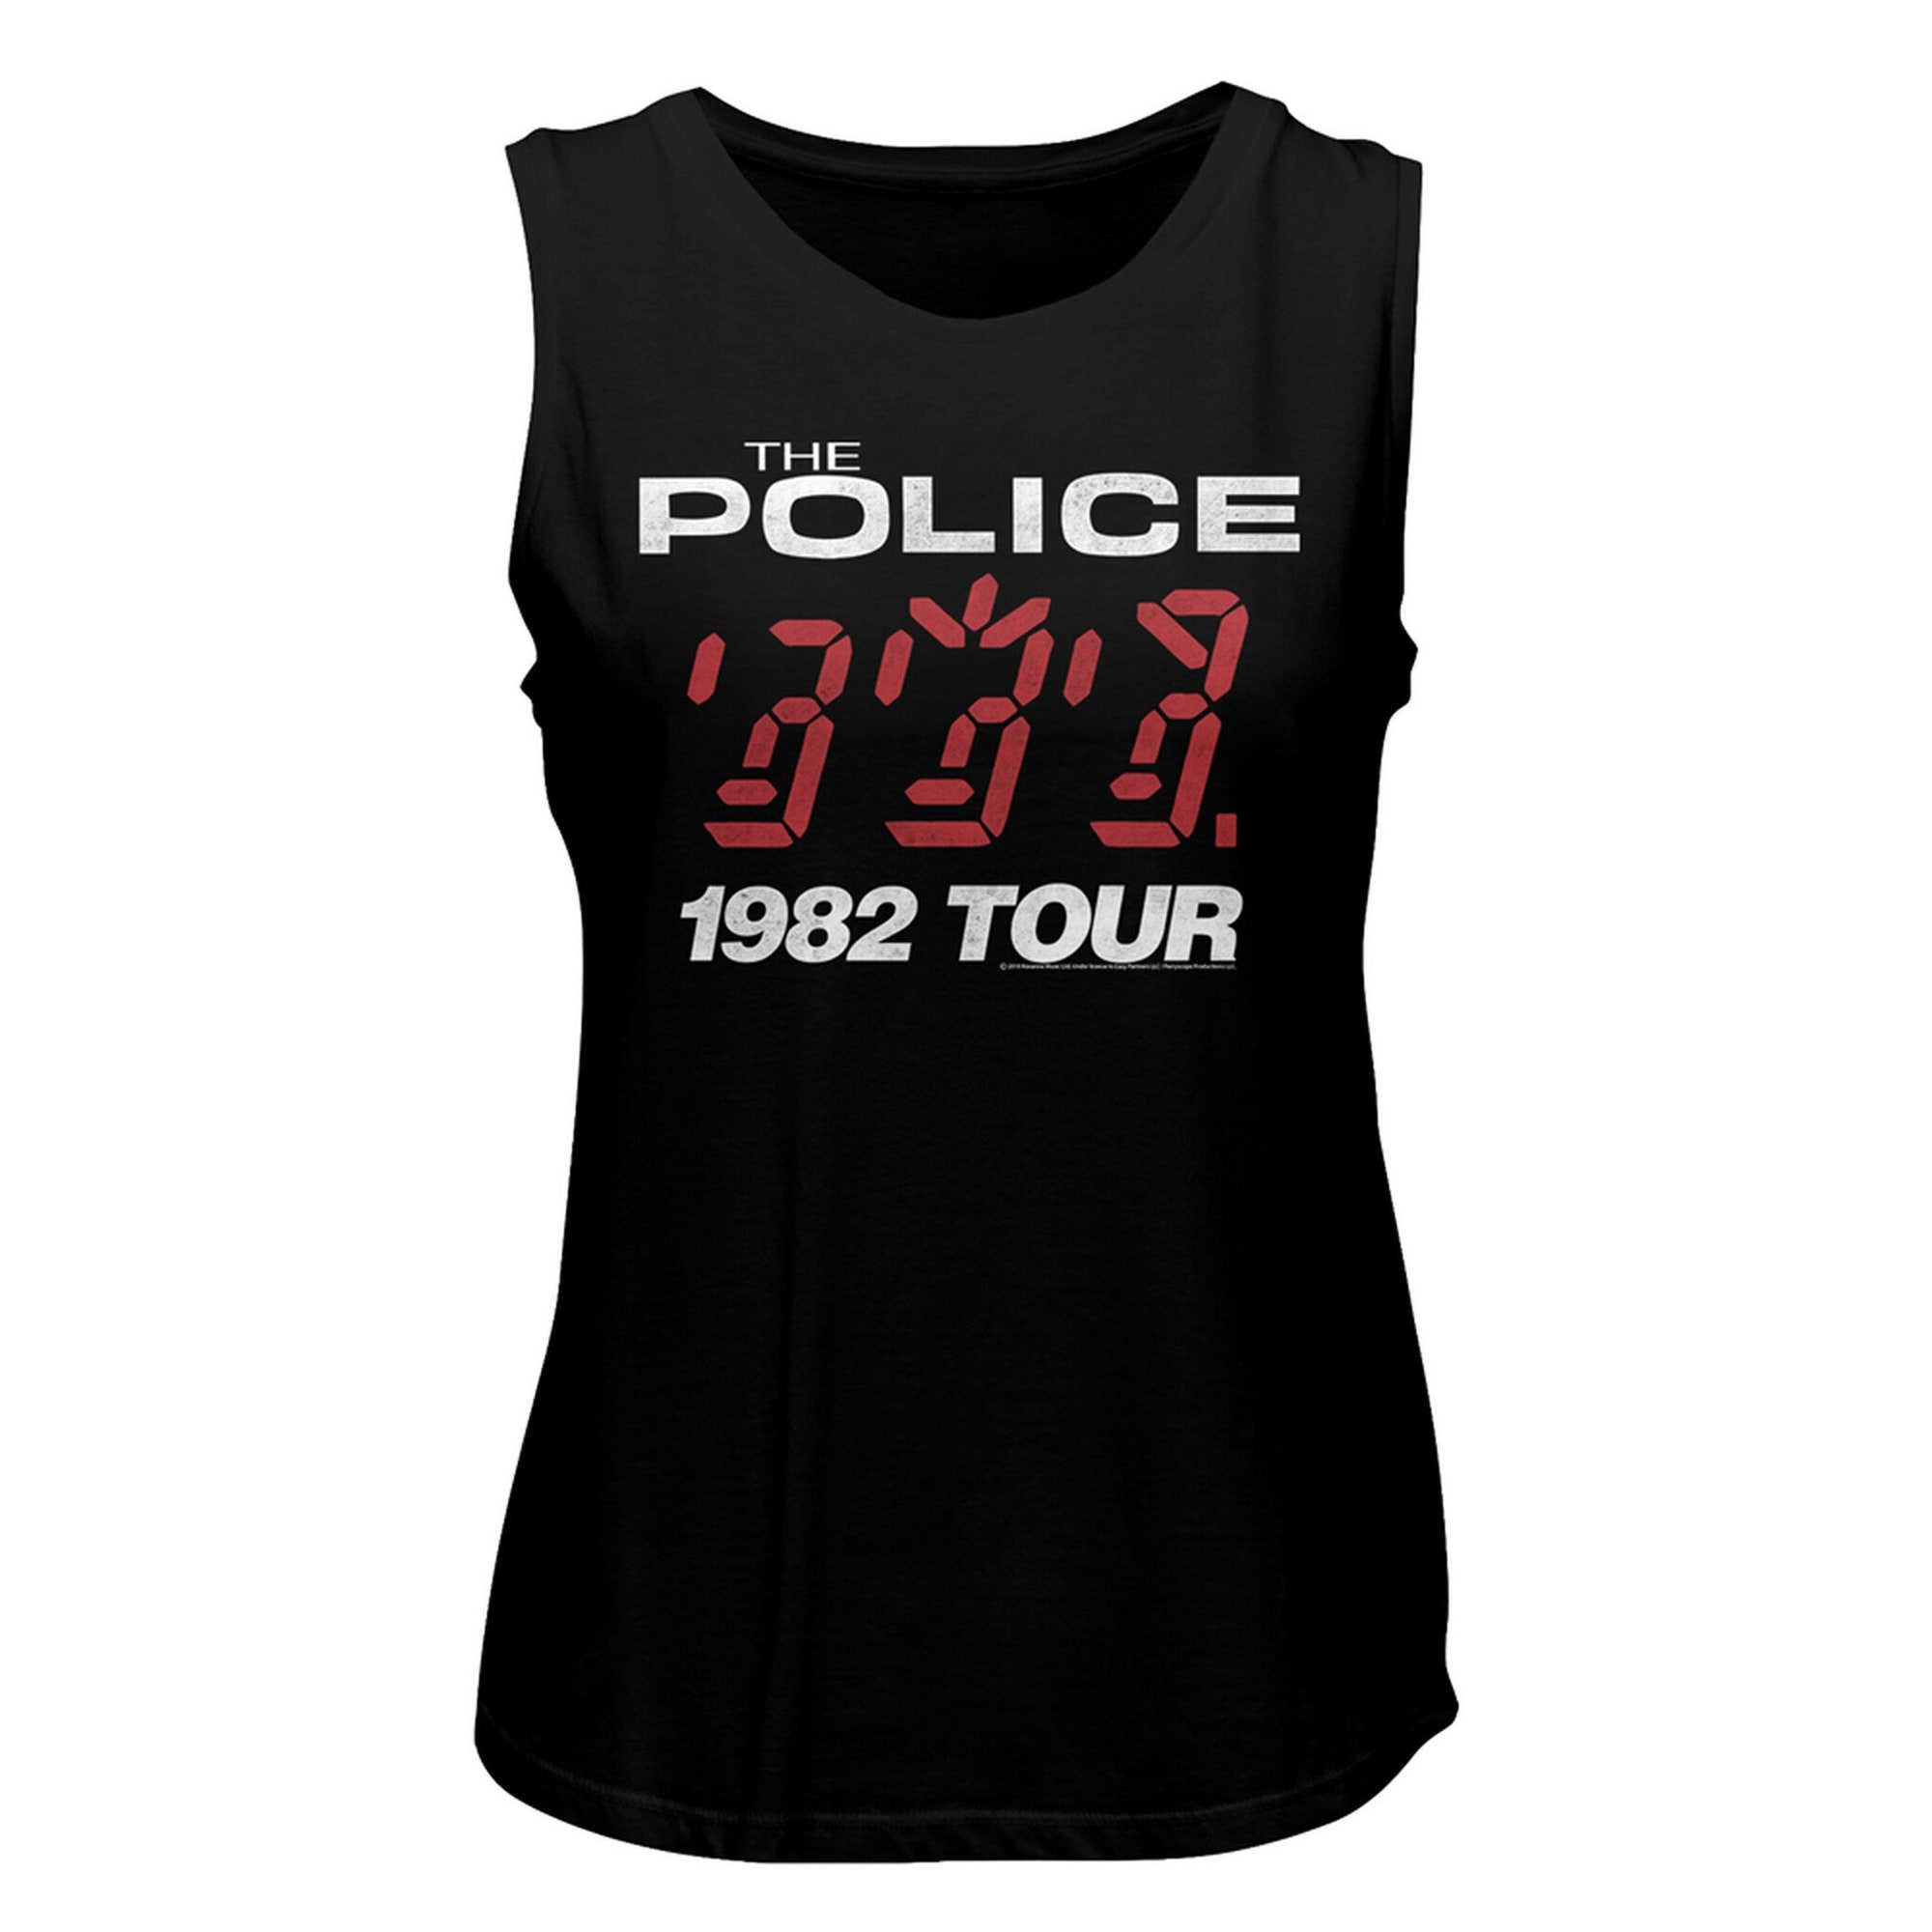 Discover The Police '82 Tour Black Muscle Tank Top